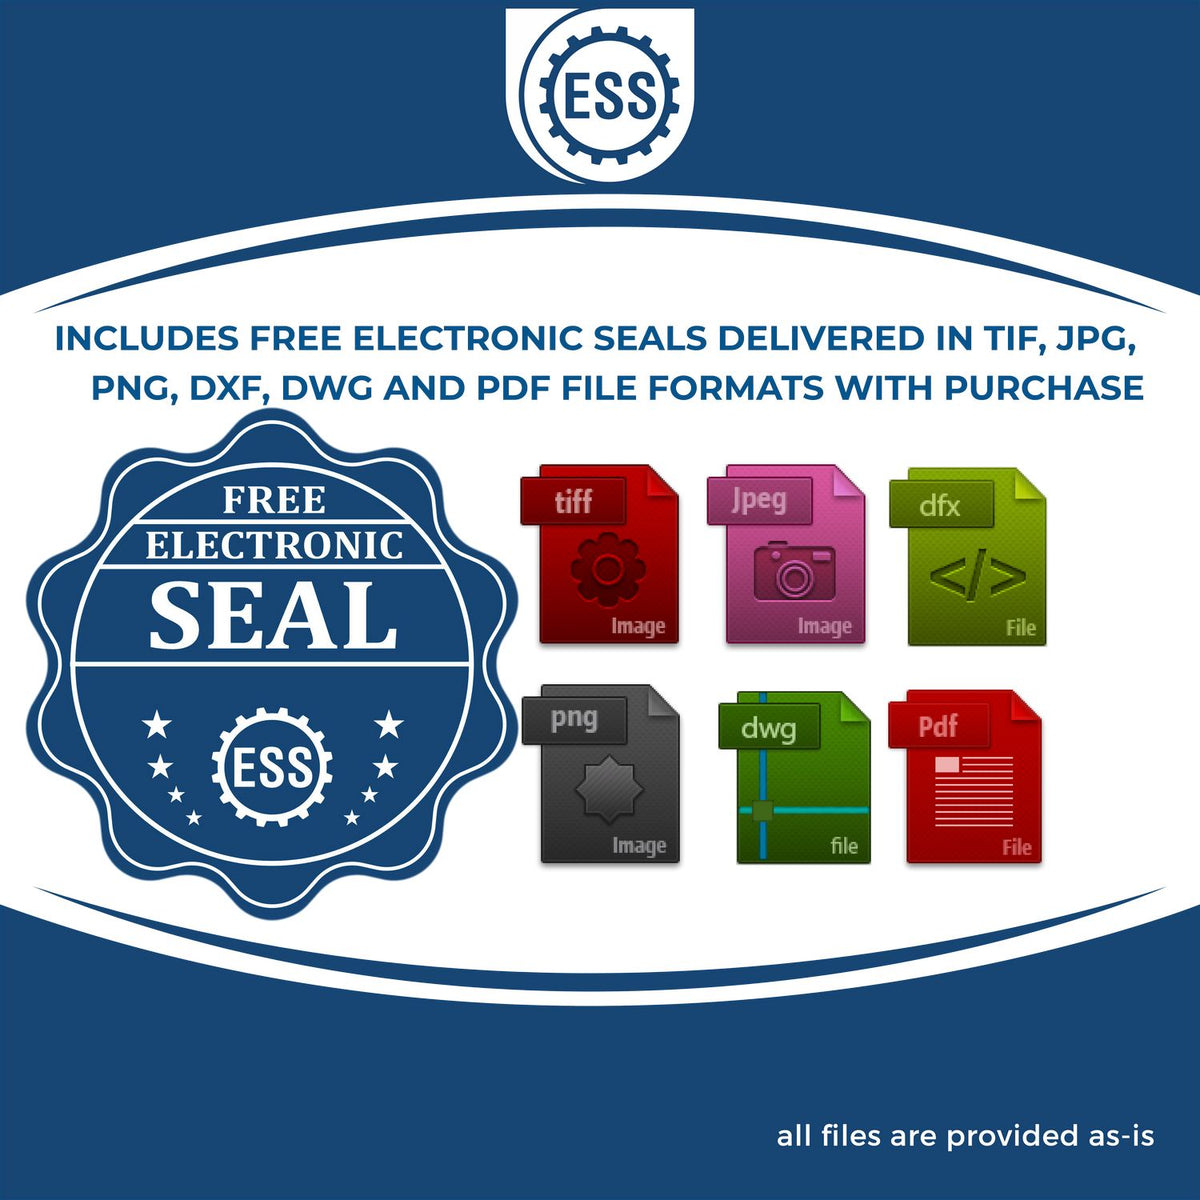 An infographic for the free electronic seal for the Heavy Duty Cast Iron Indiana Geologist Seal Embosser illustrating the different file type icons such as DXF, DWG, TIF, JPG and PNG.